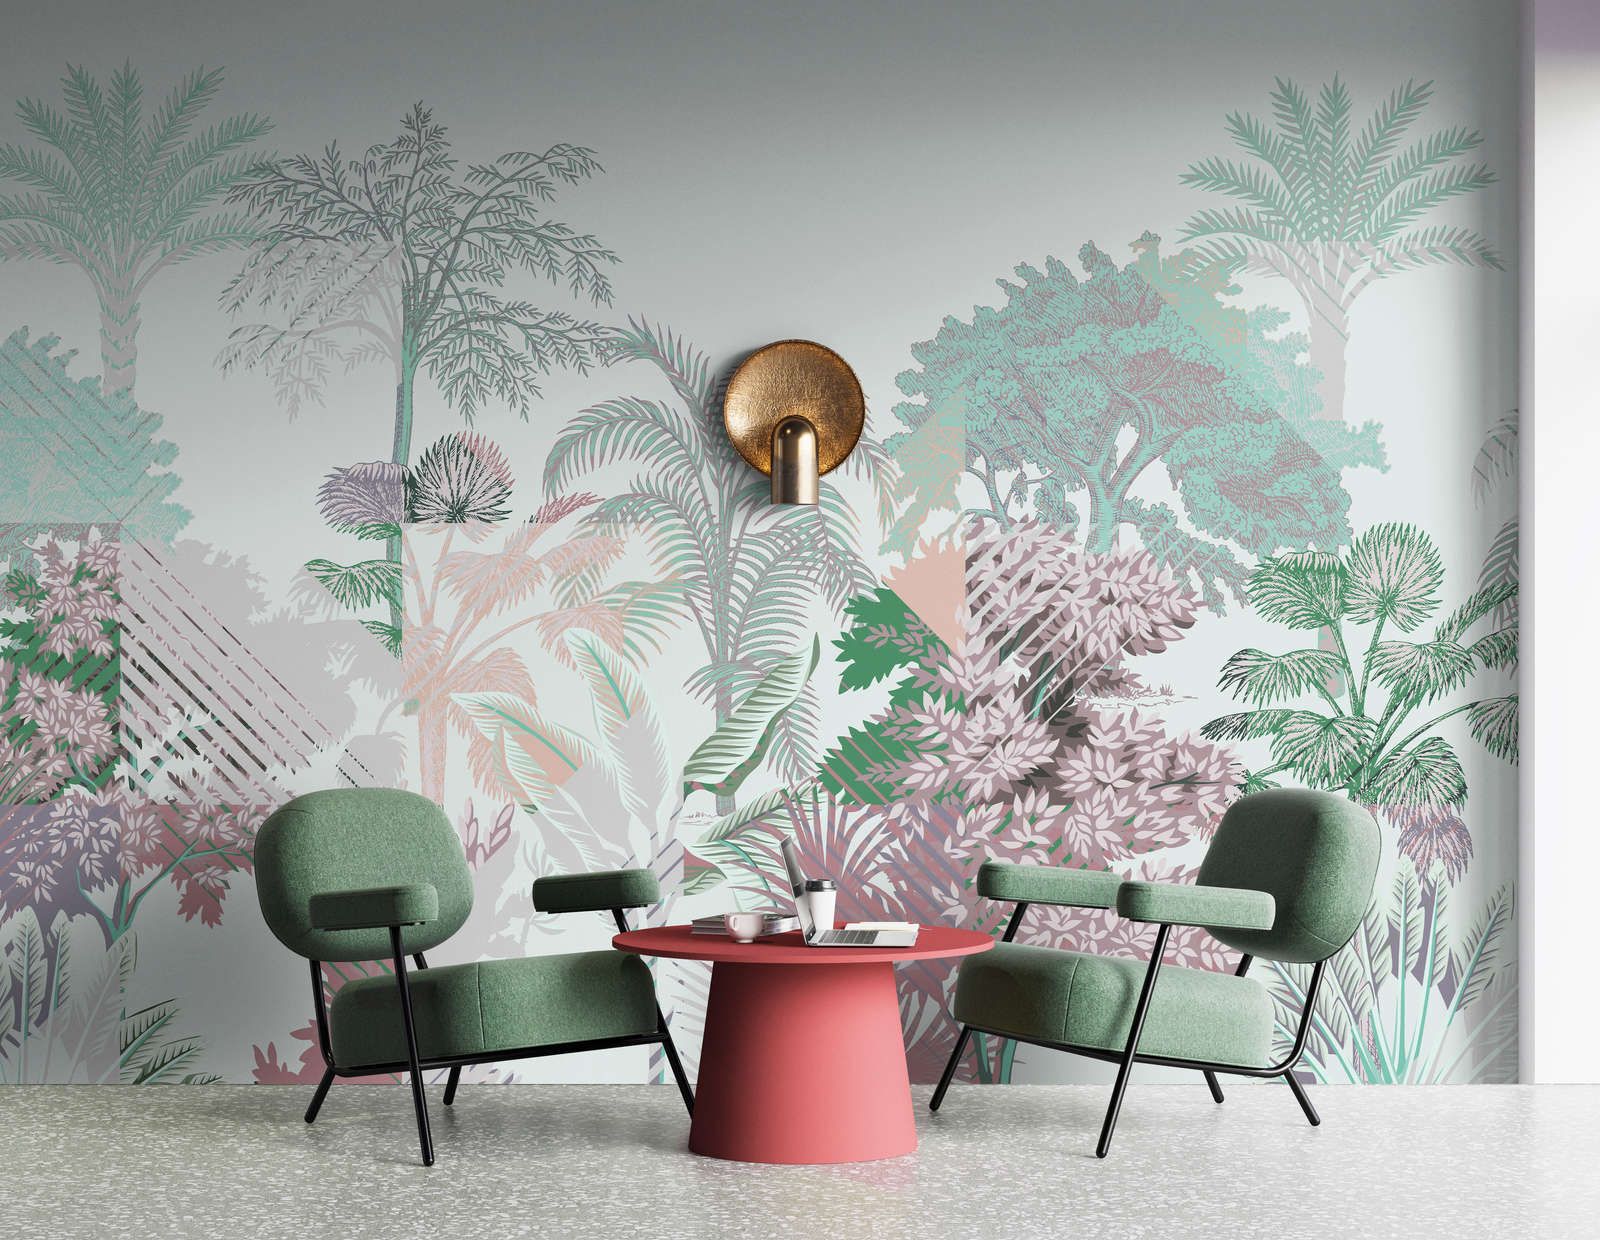             Photo wallpaper »esplanade 1« - Jungle patchwork with shrubs - Green, Pink | Smooth, slightly shiny premium non-woven fabric
        